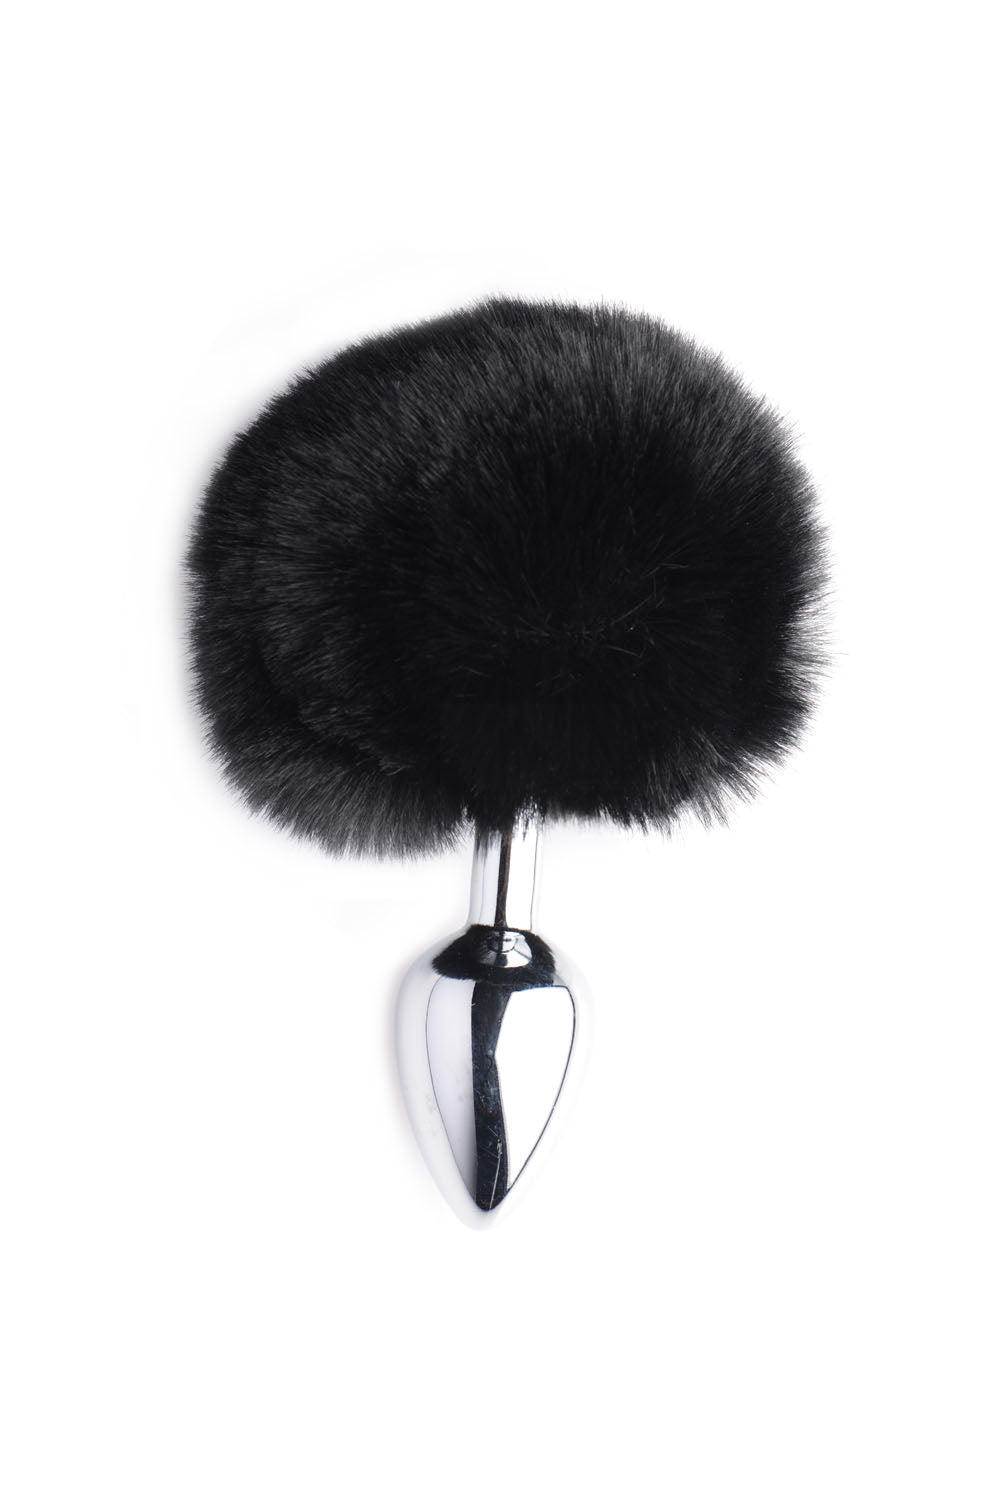 Onyx Bunny Tail Anal Plug: Petite, Metal Plug for Beginners with Adorable White Tail*